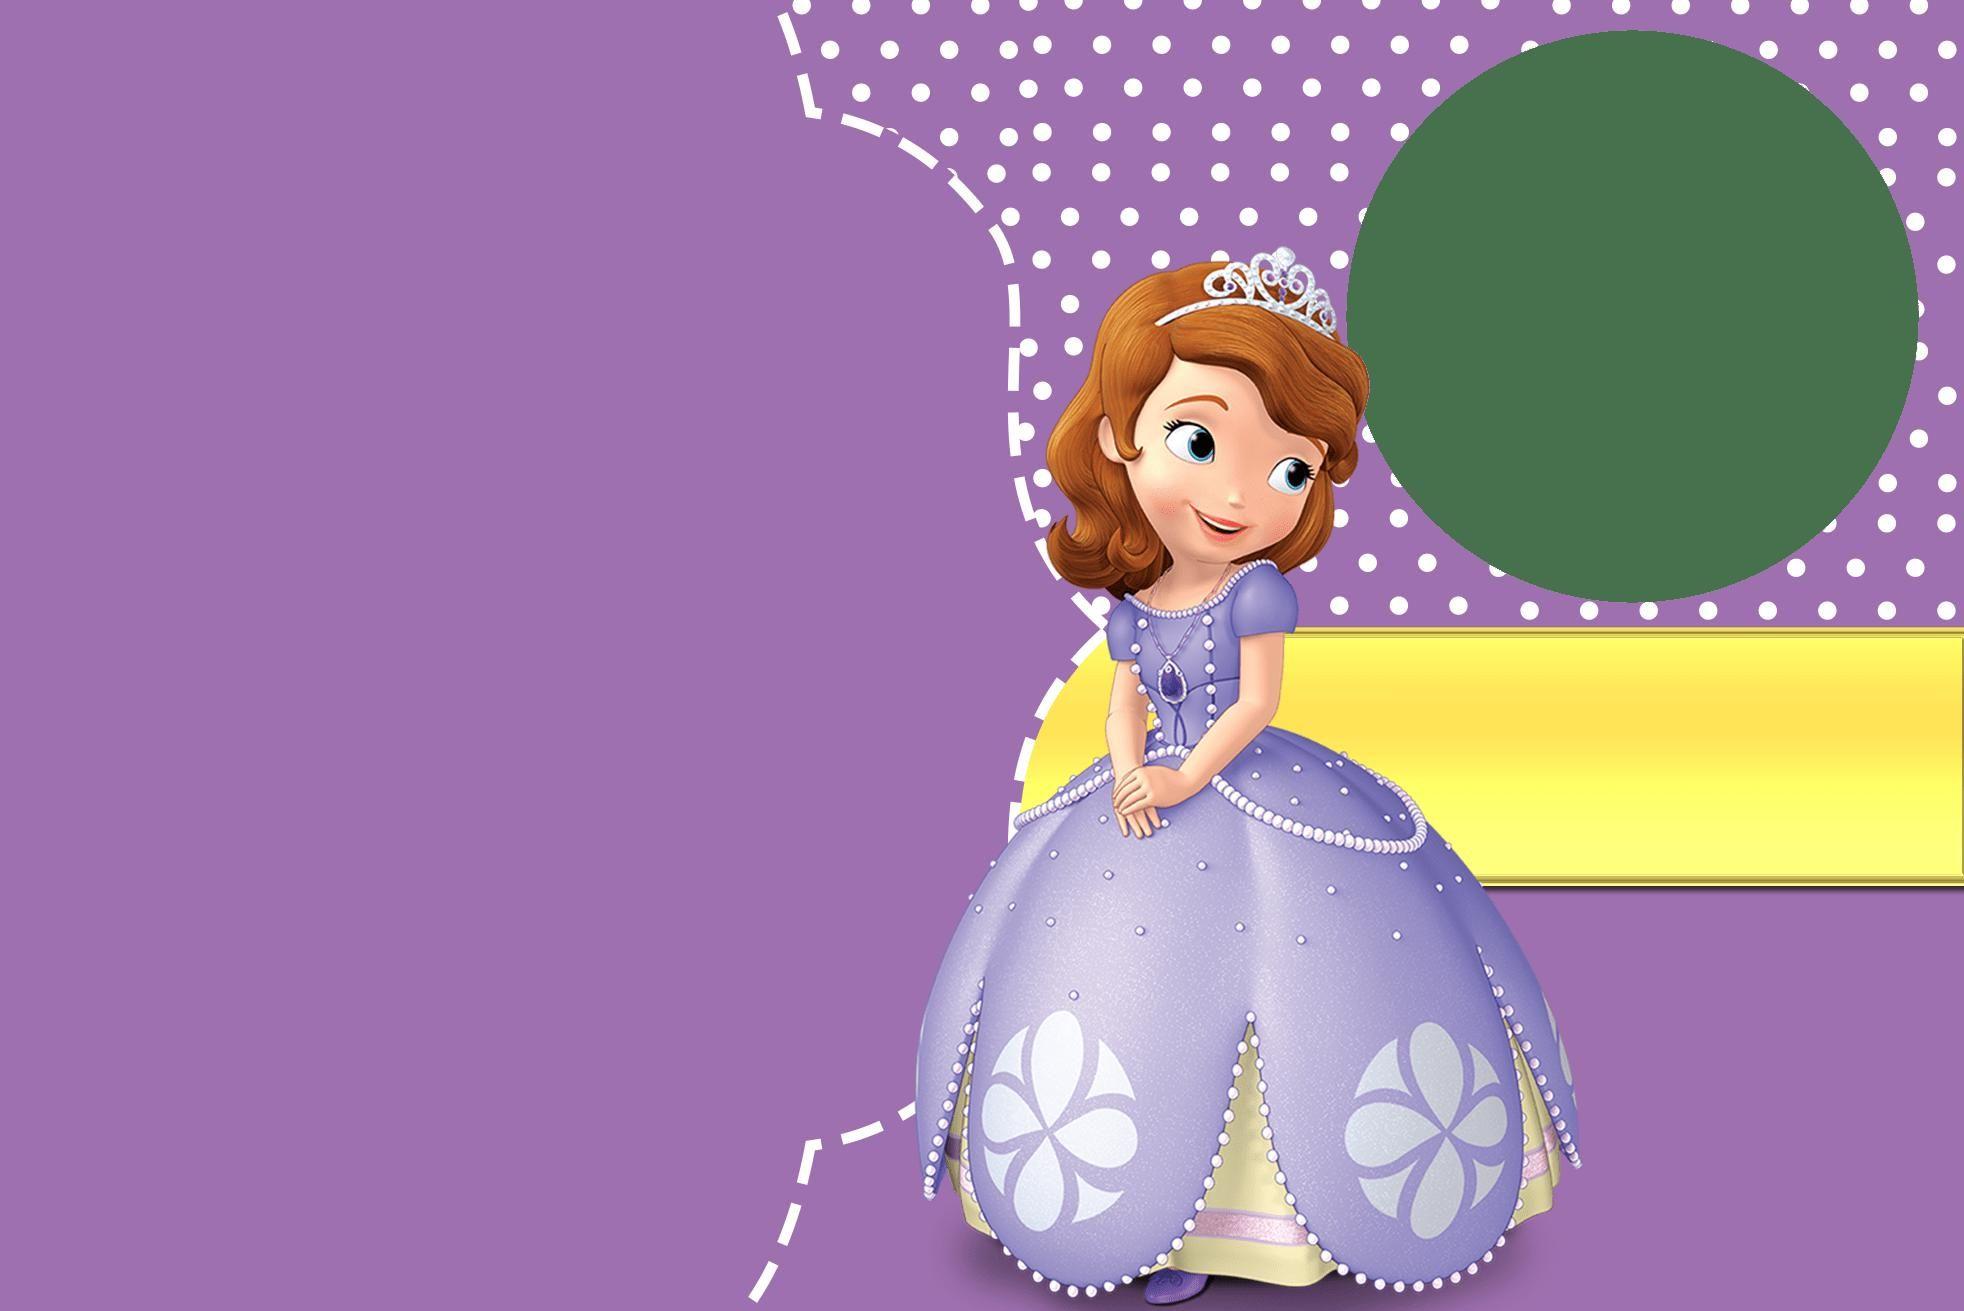 Sofia the First Wallpapers - Top Free